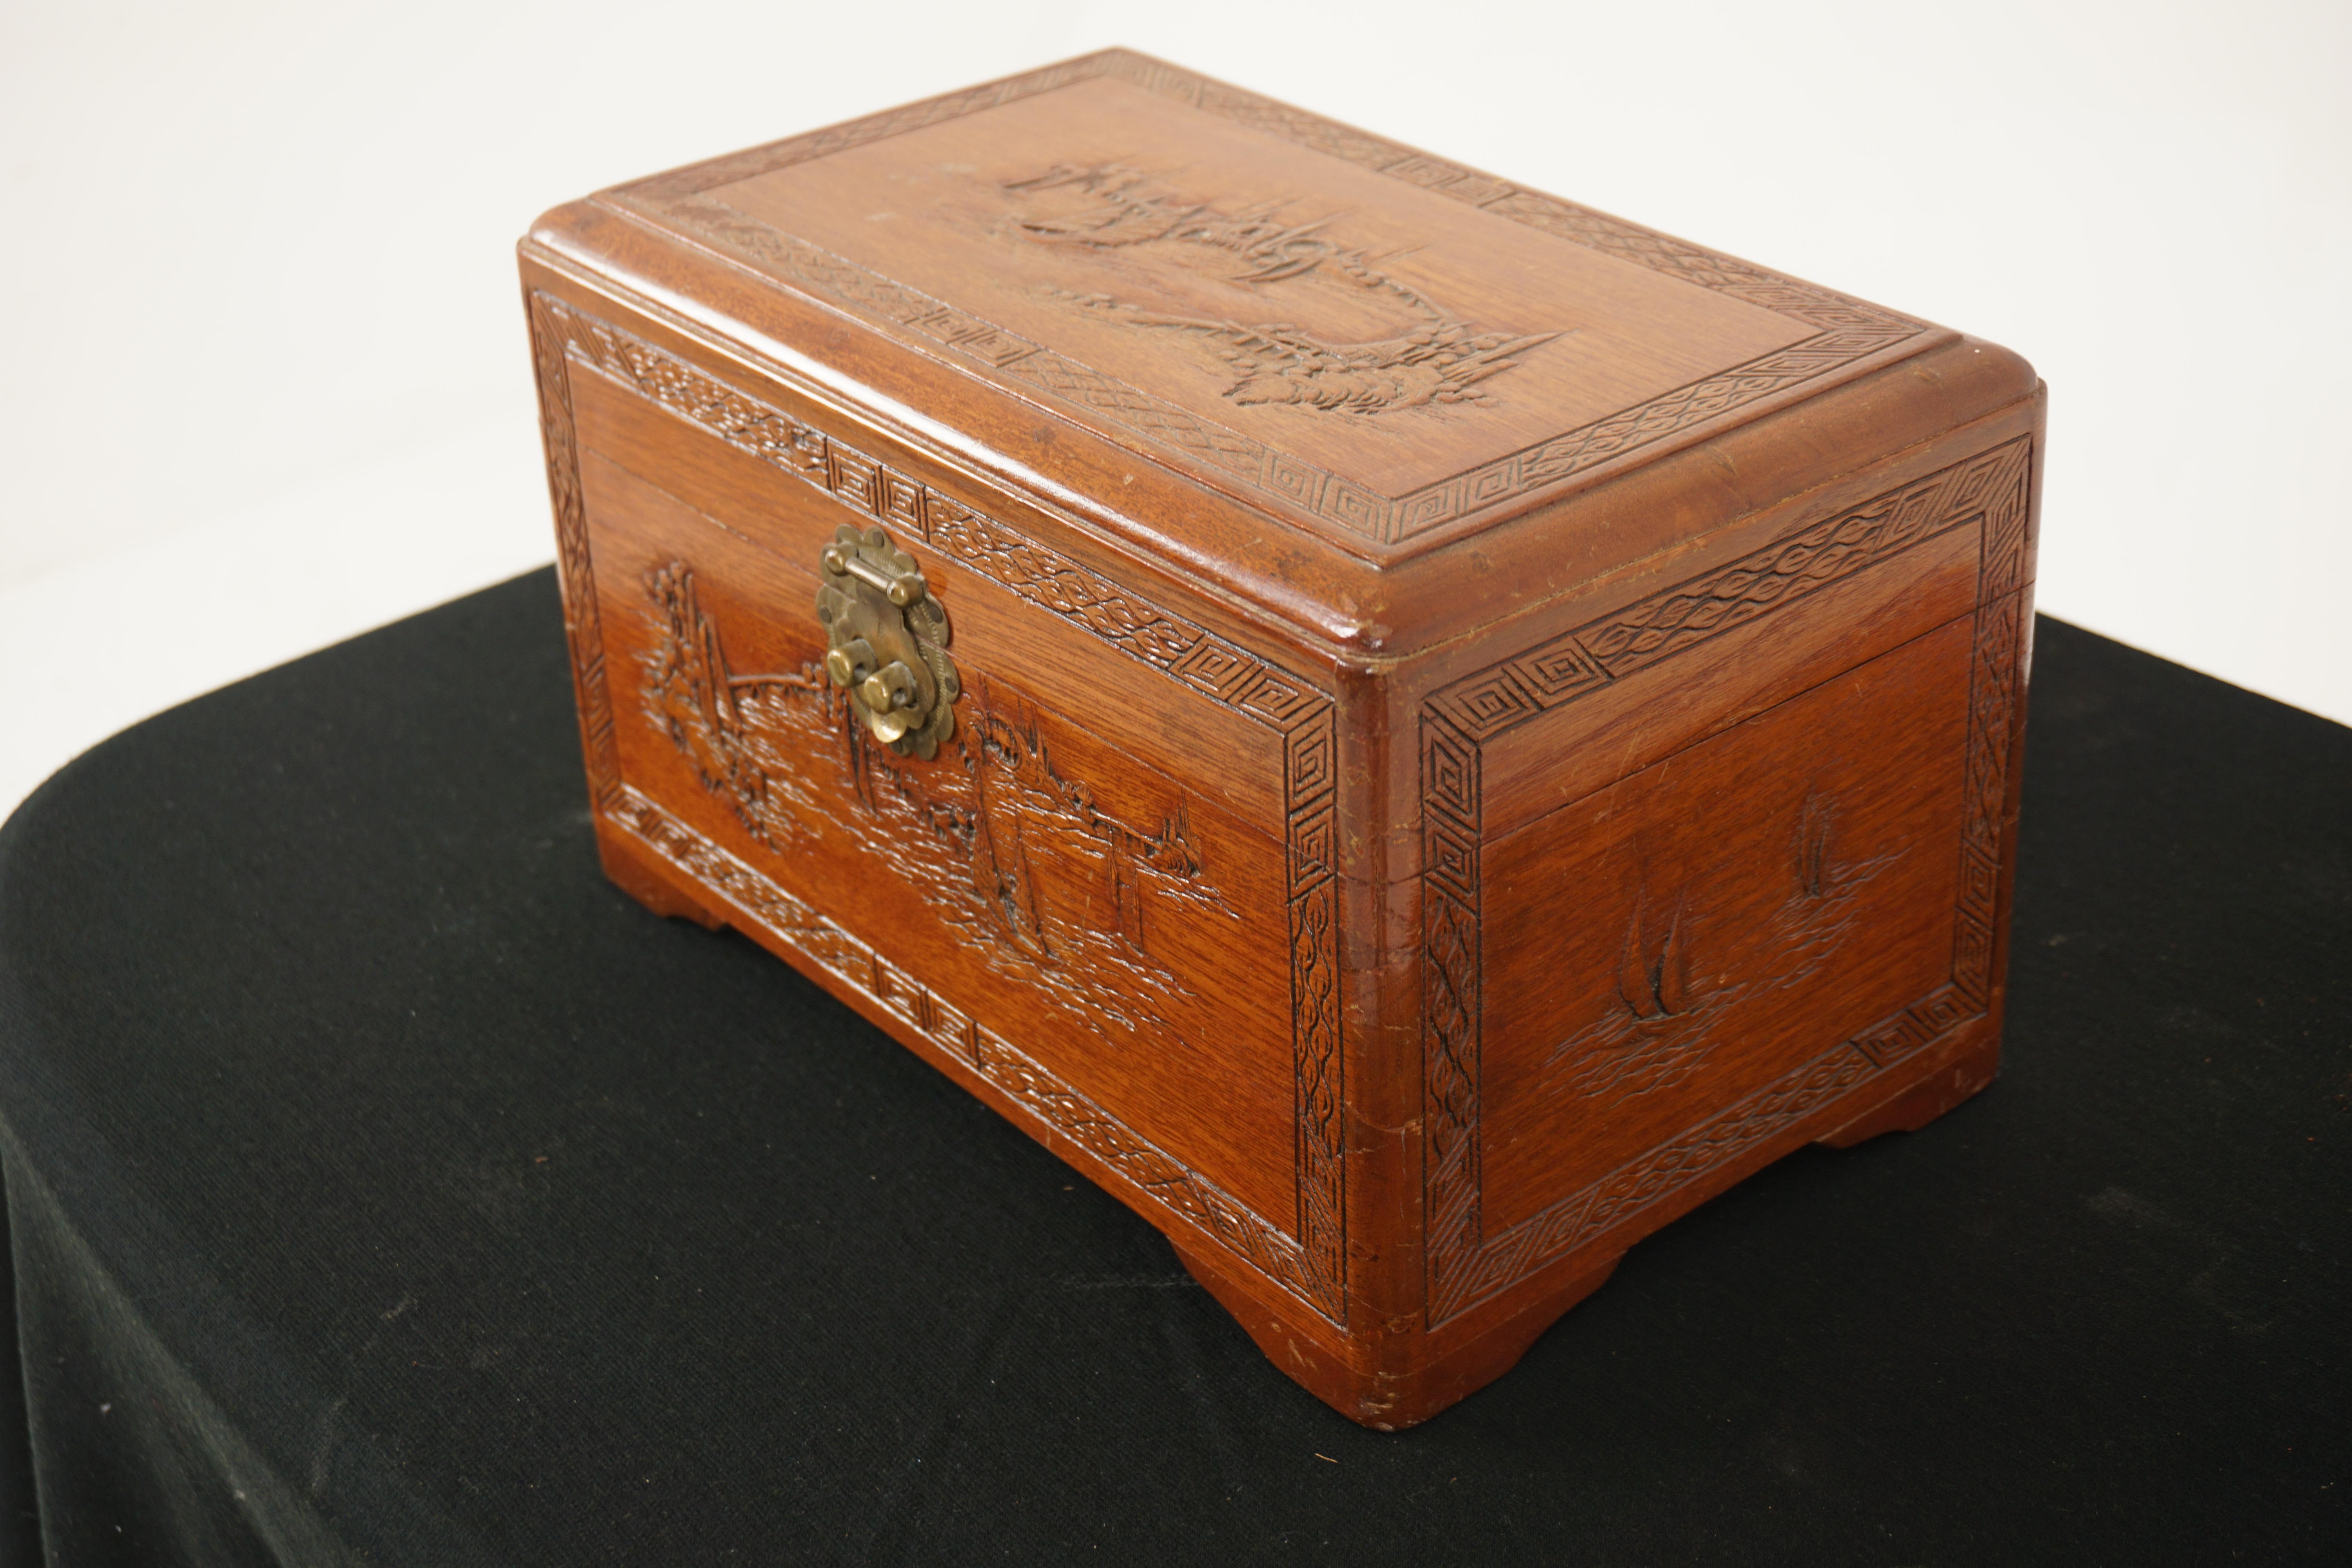 Vintage Chinesecarved camphorwood jewellery box, China 1930, H895

China,1930
Solid Camphor wood.
Original finish.
Carved lift up lid.
With left out tray interior.
Original brass lock.
Carved front back and side.
All standing on bracket